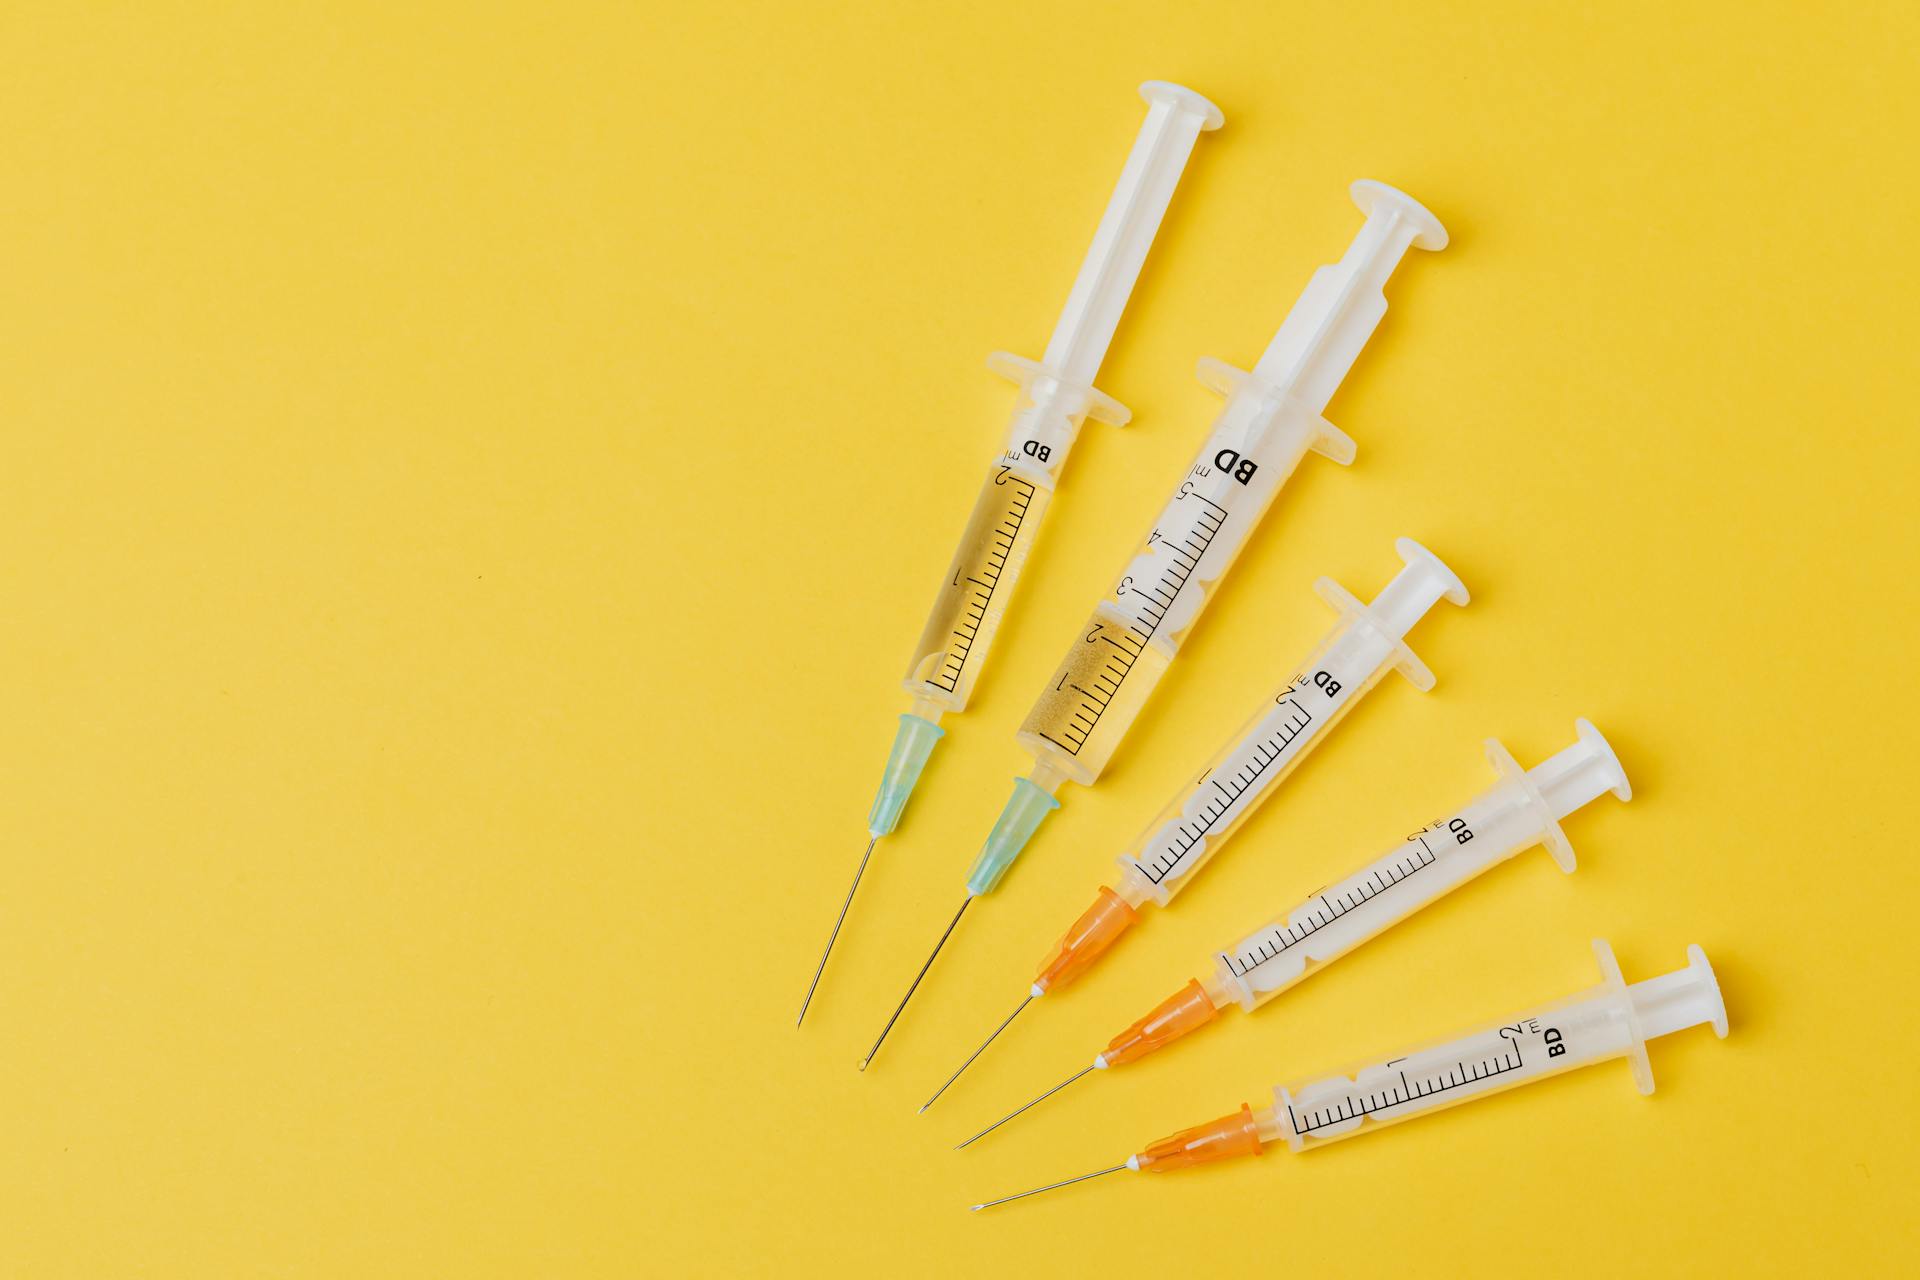 Syringes on a yellow background